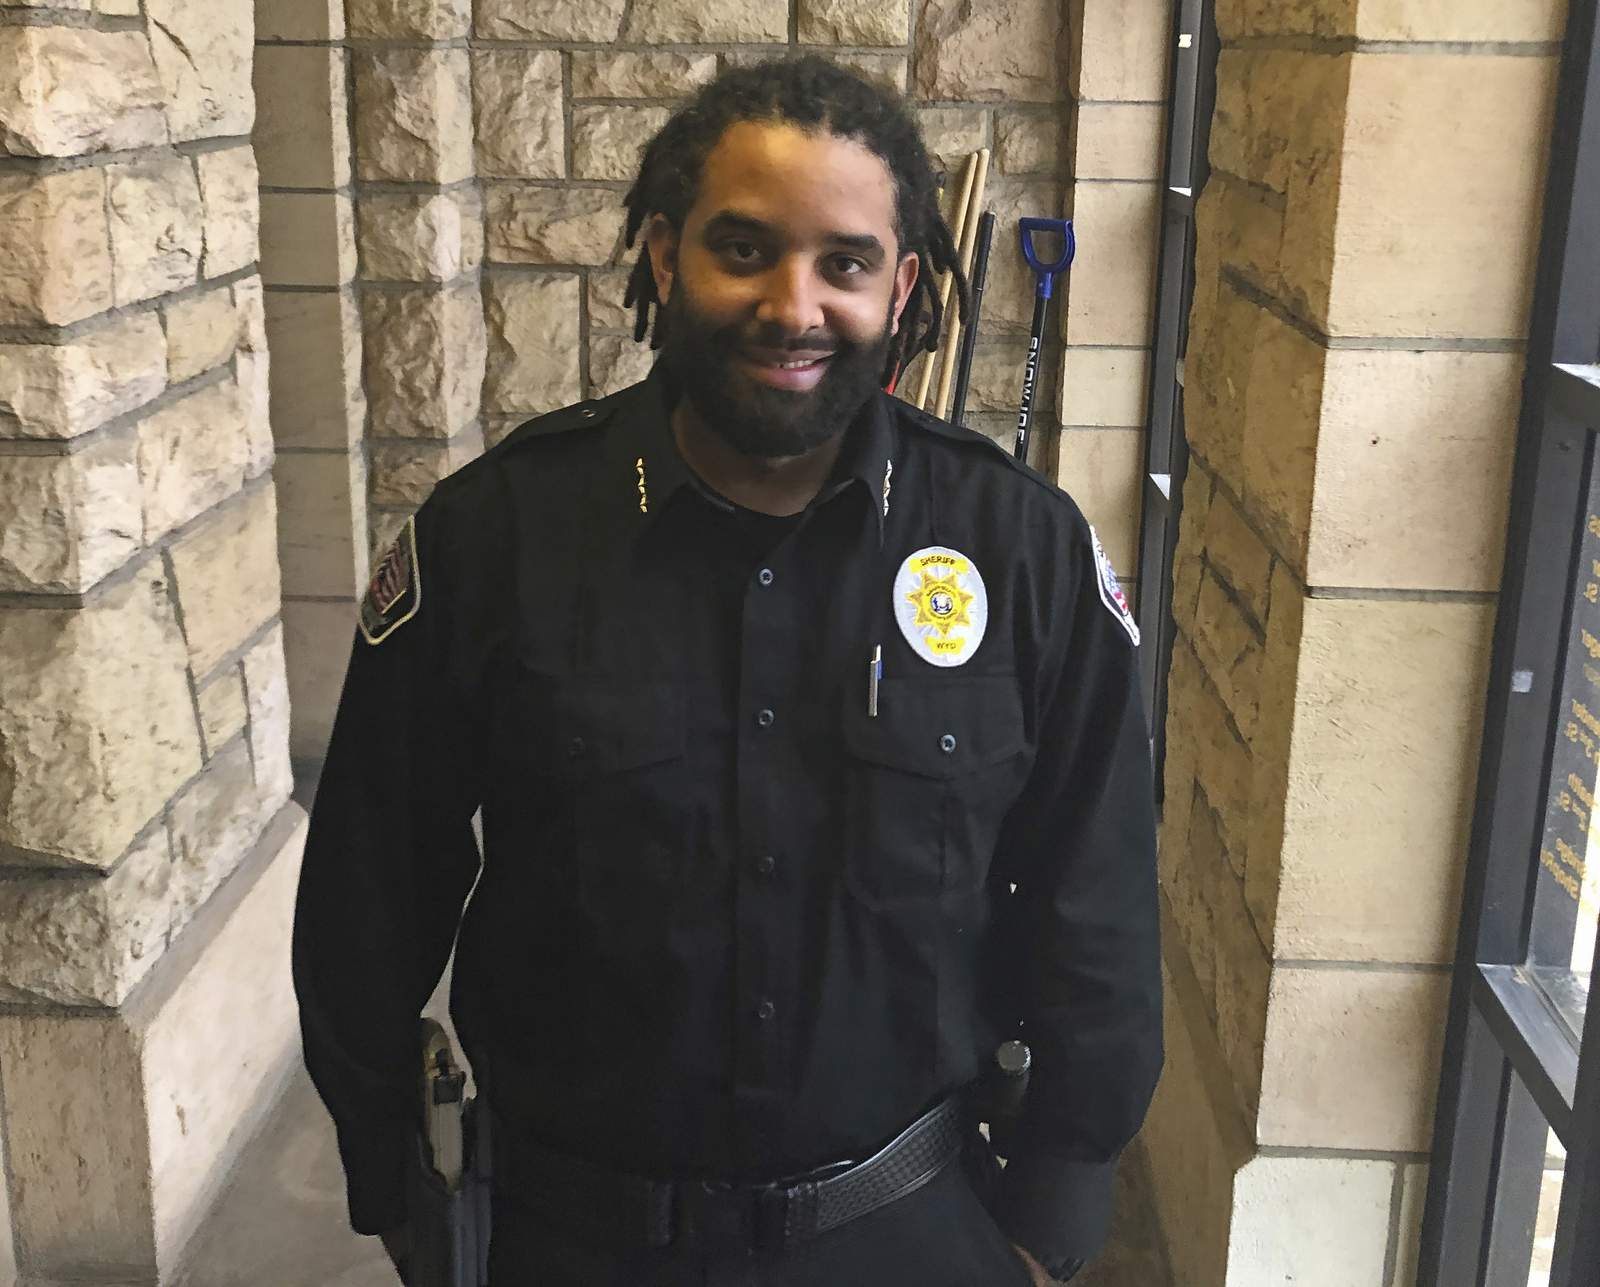 After shooting, unrest, Wyoming gets its first Black sheriff